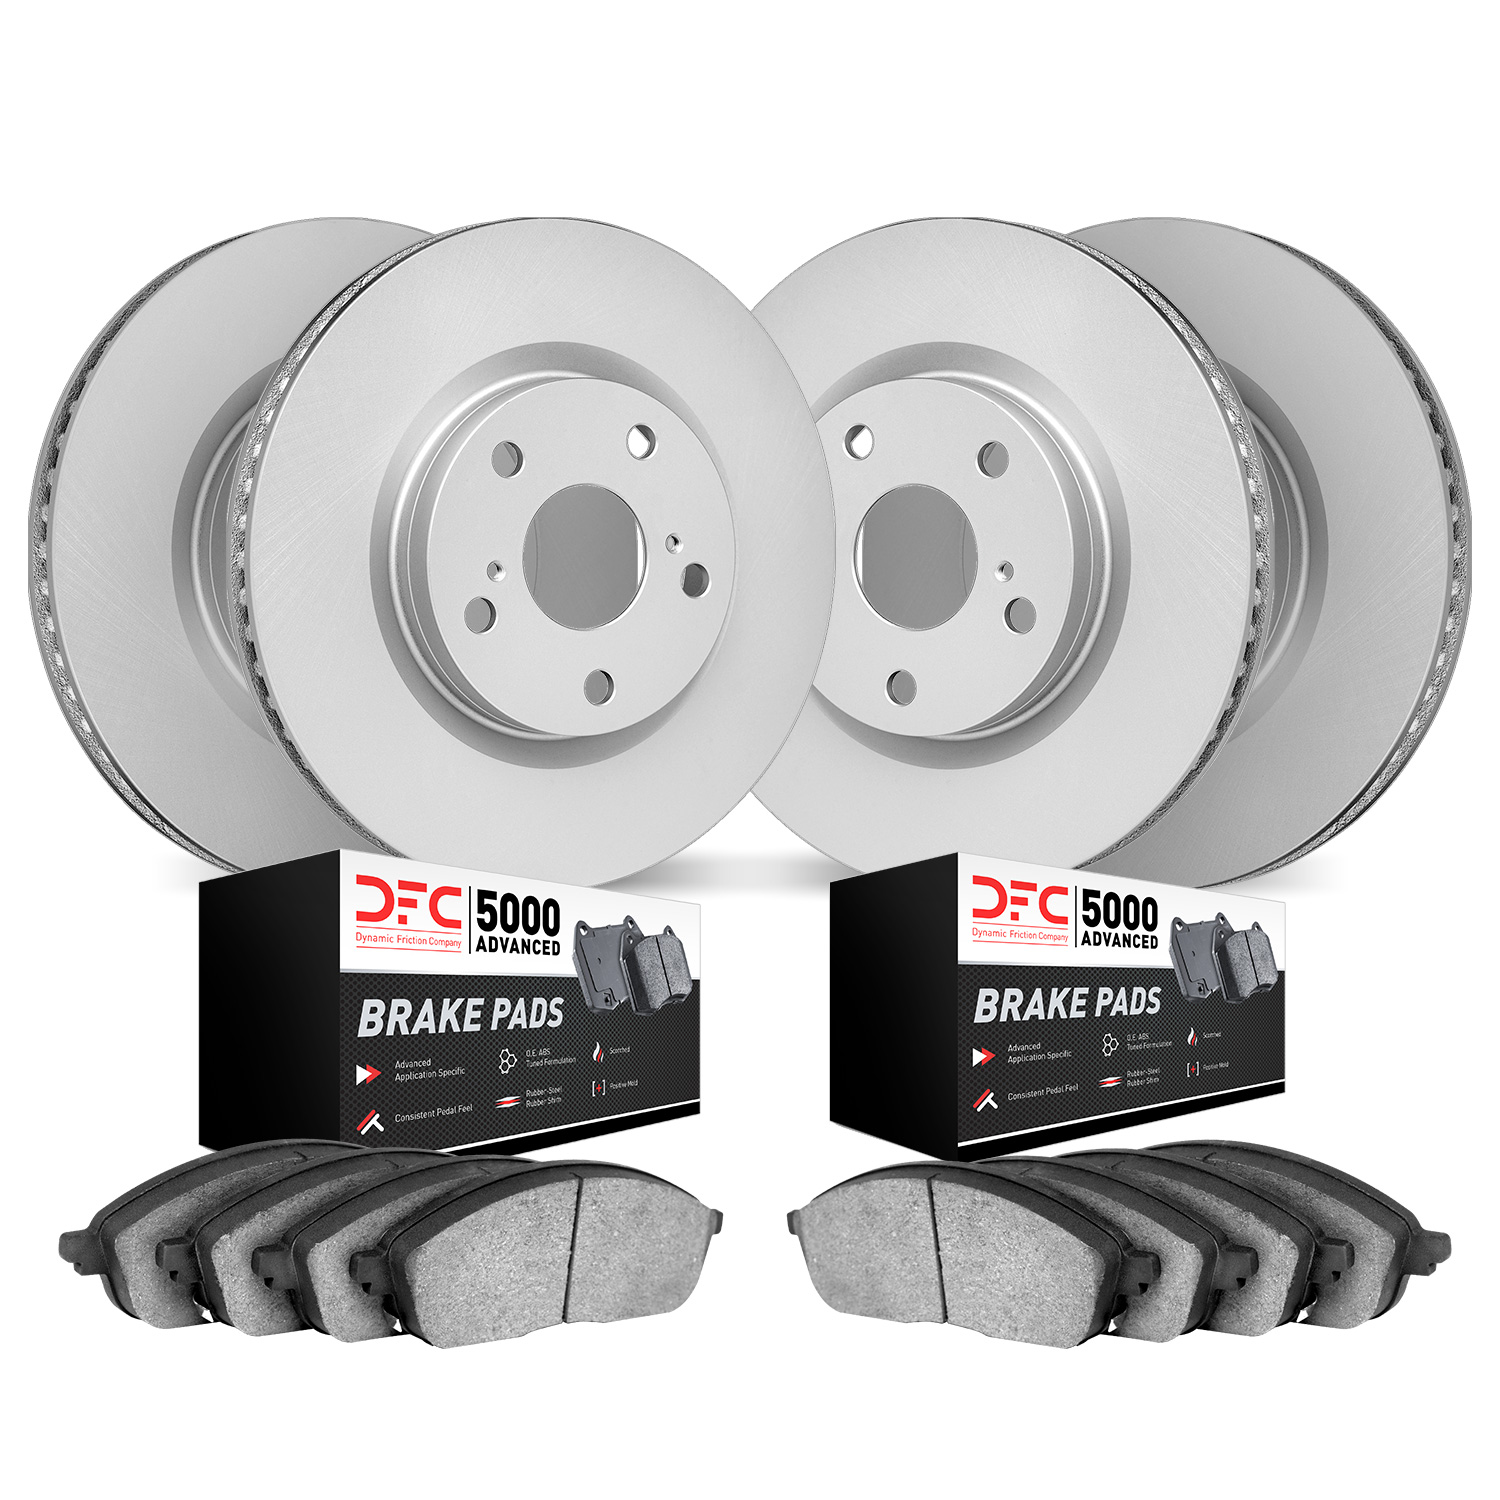 4504-31158 Geospec Brake Rotors w/5000 Advanced Brake Pads Kit, Fits Select Multiple Makes/Models, Position: Front and Rear